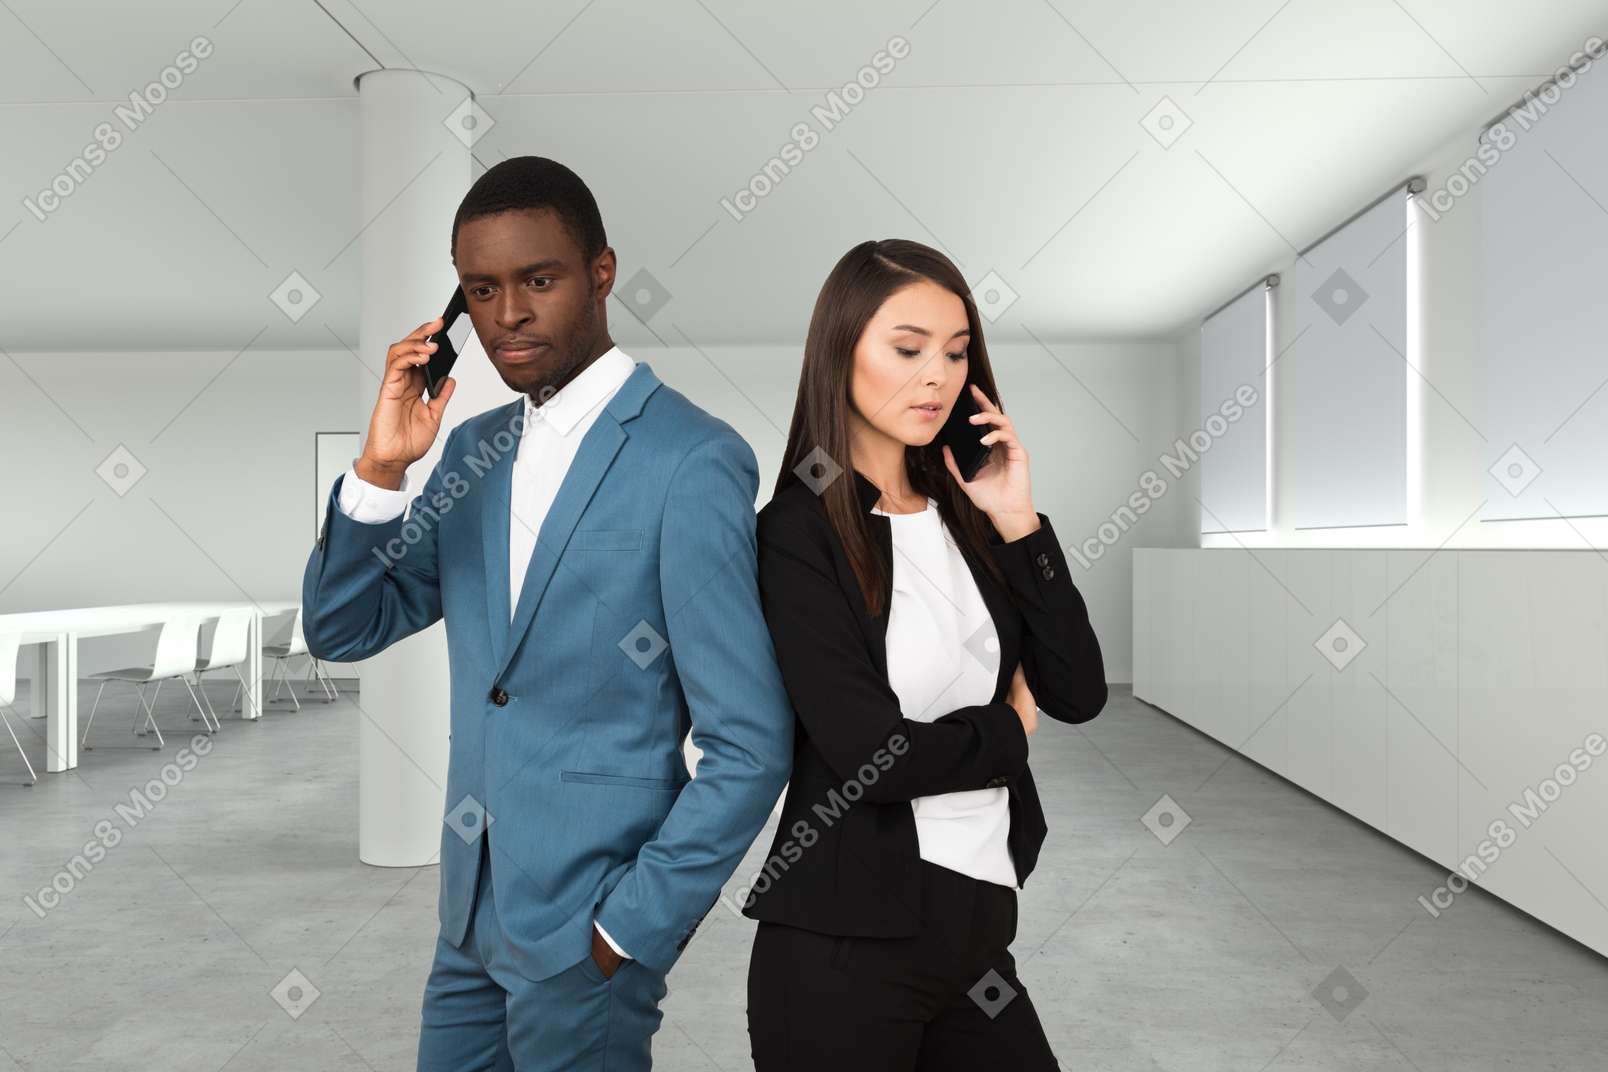 A man and a woman are talking on cell phones